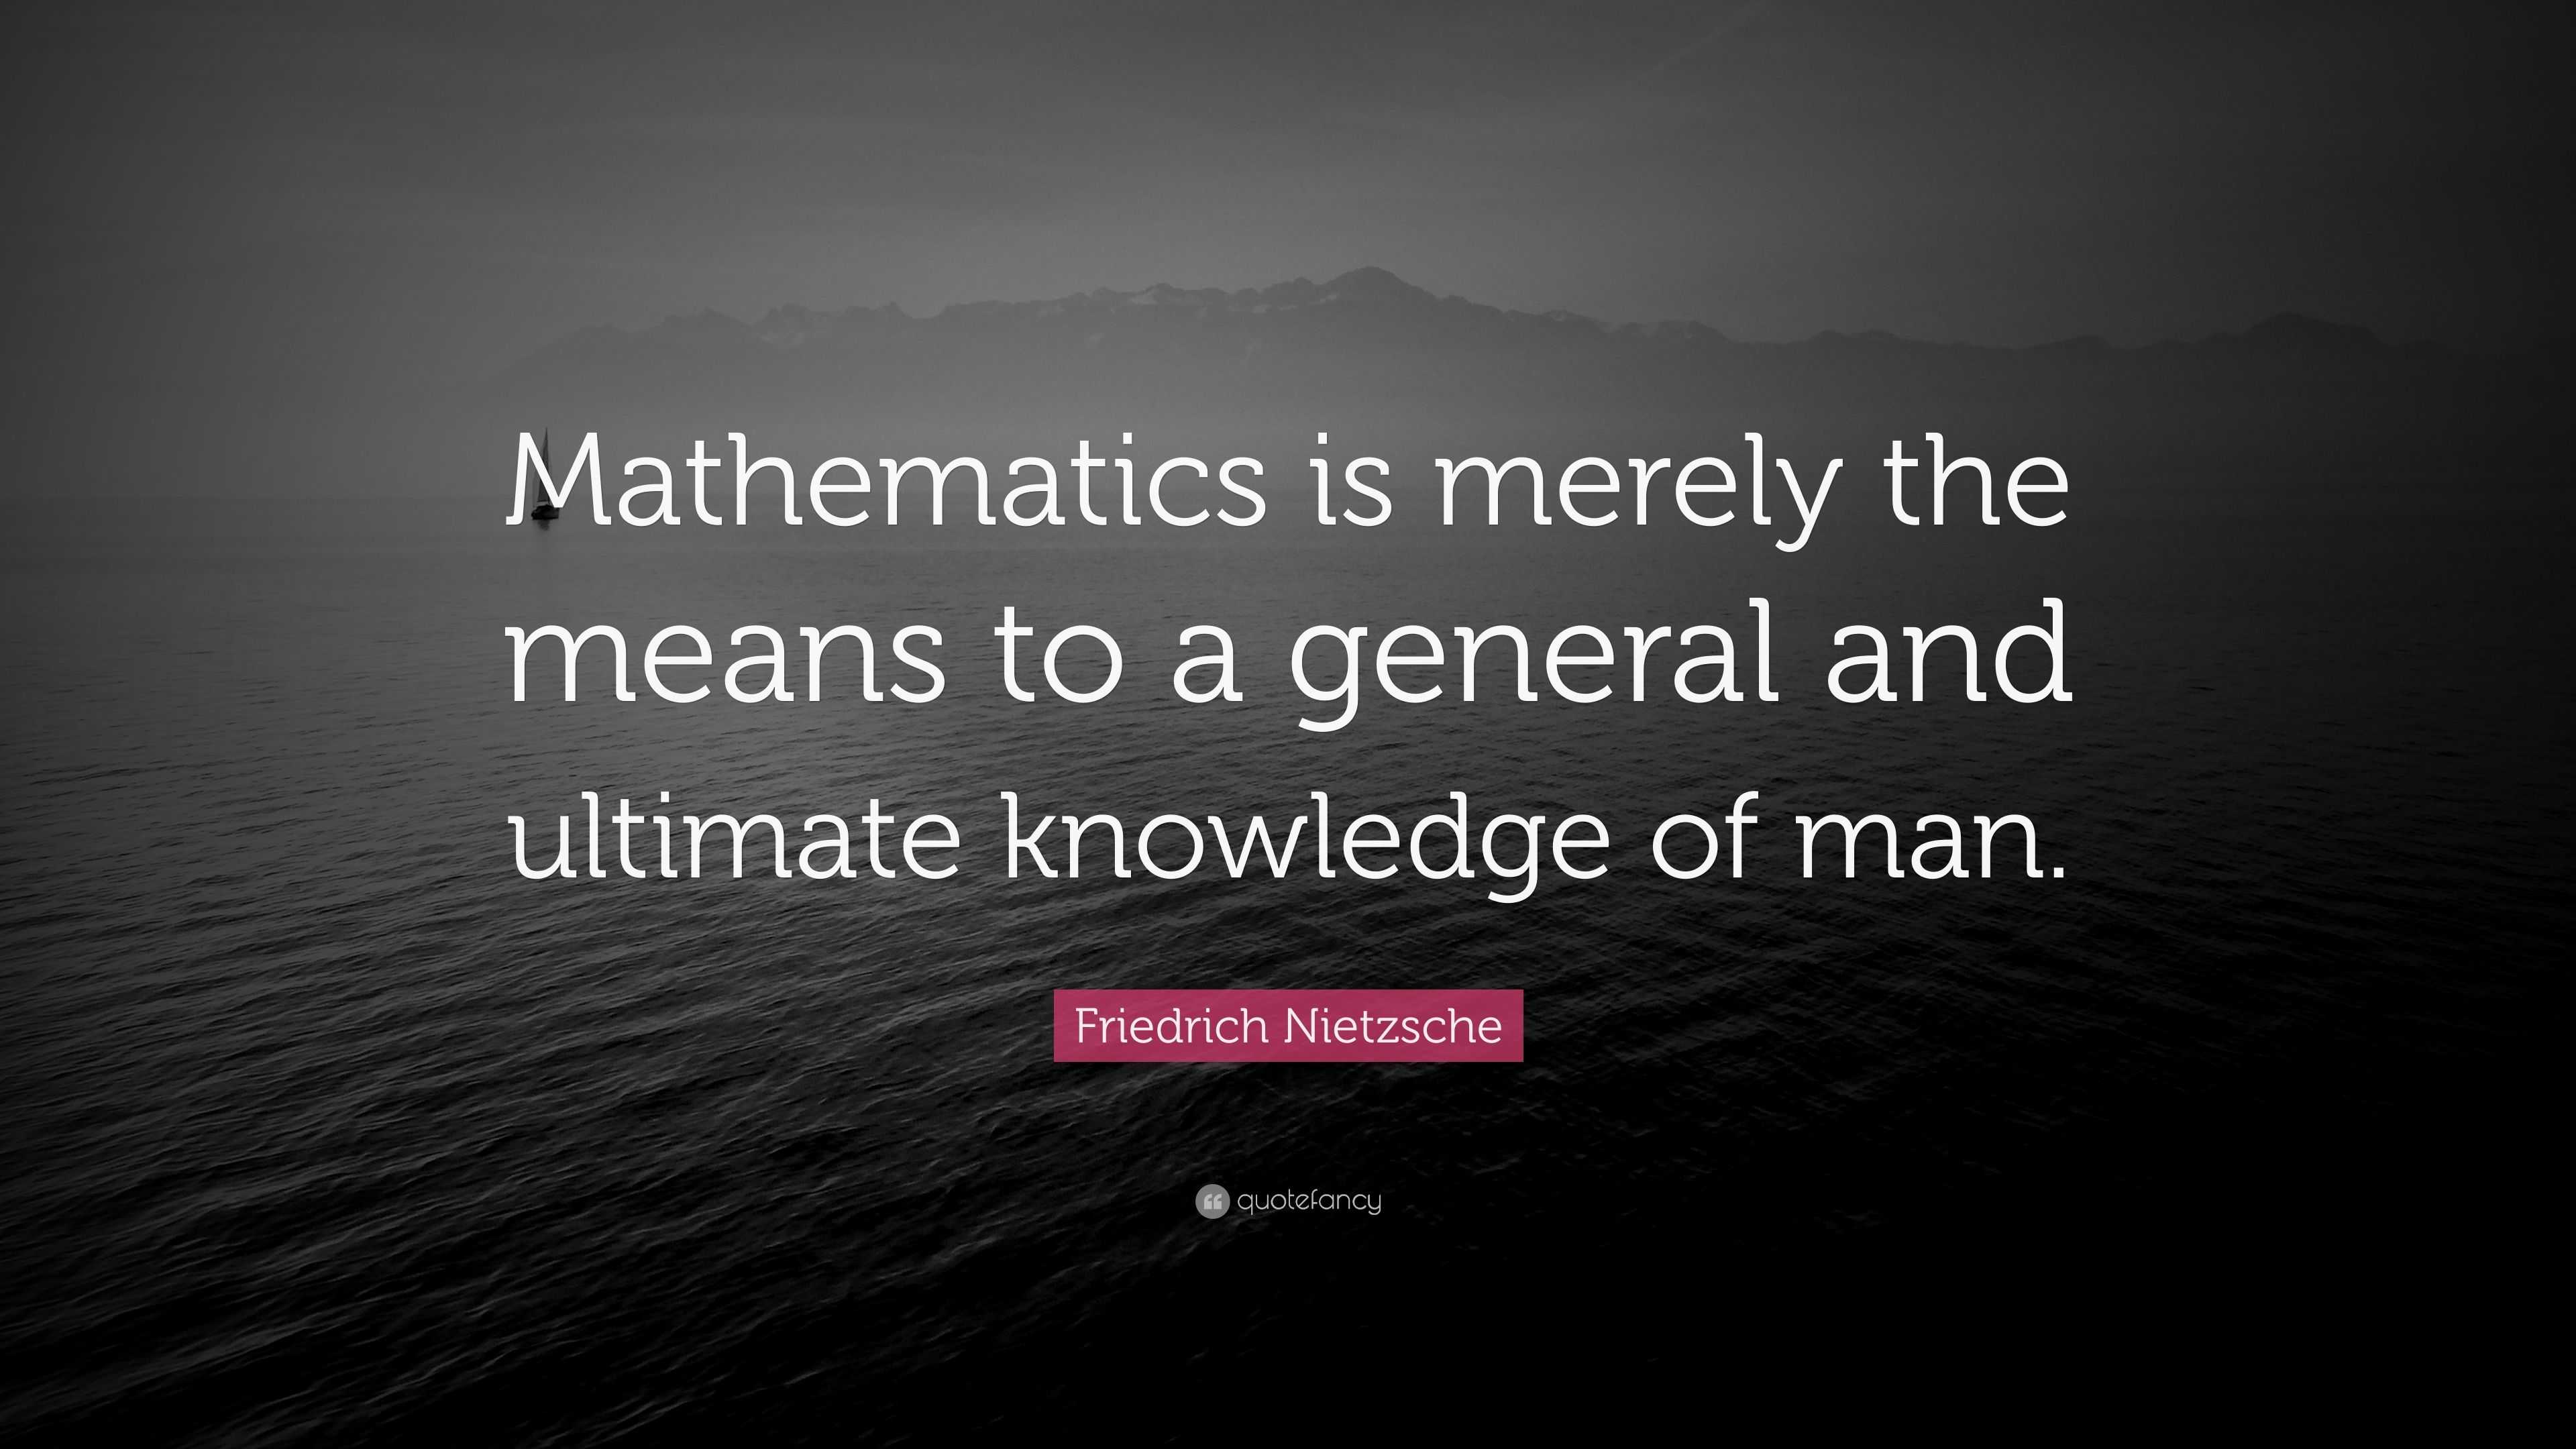 Mathematics is merely the means to a general and ultimate